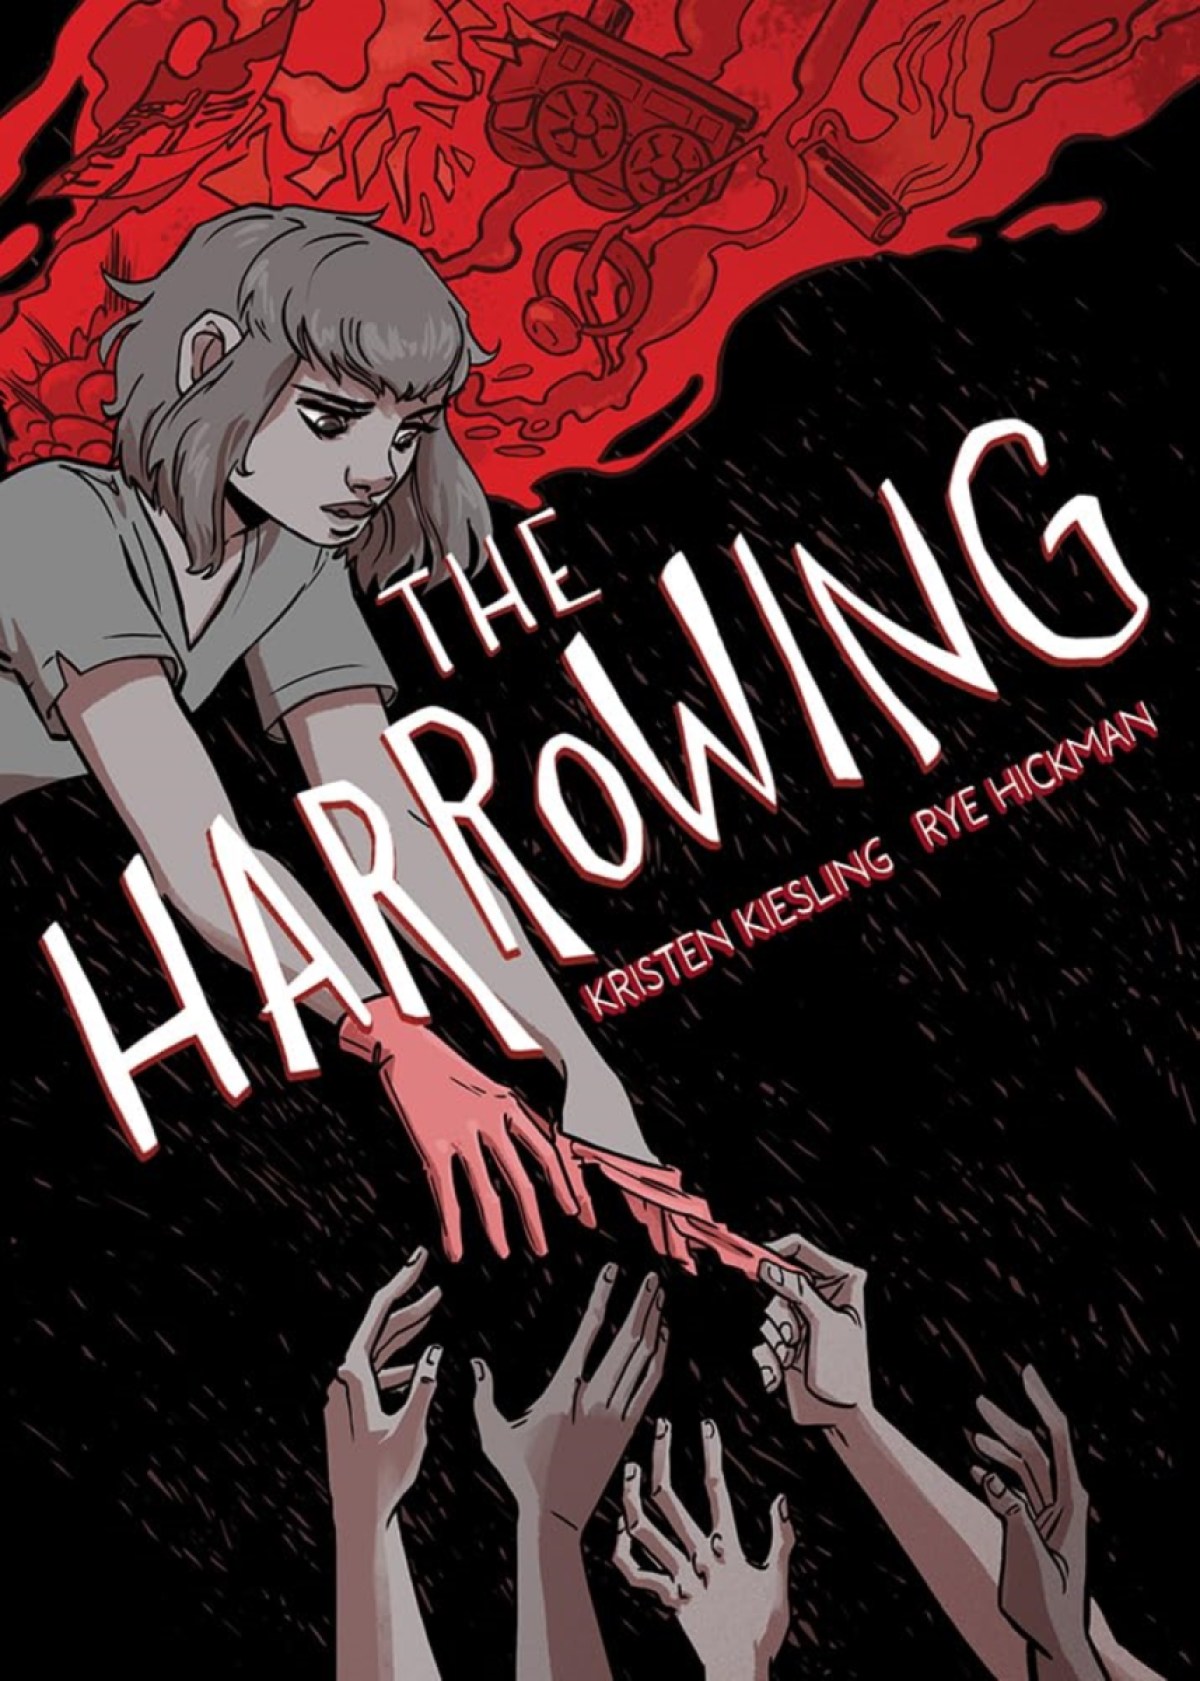 The Harrowing cover art